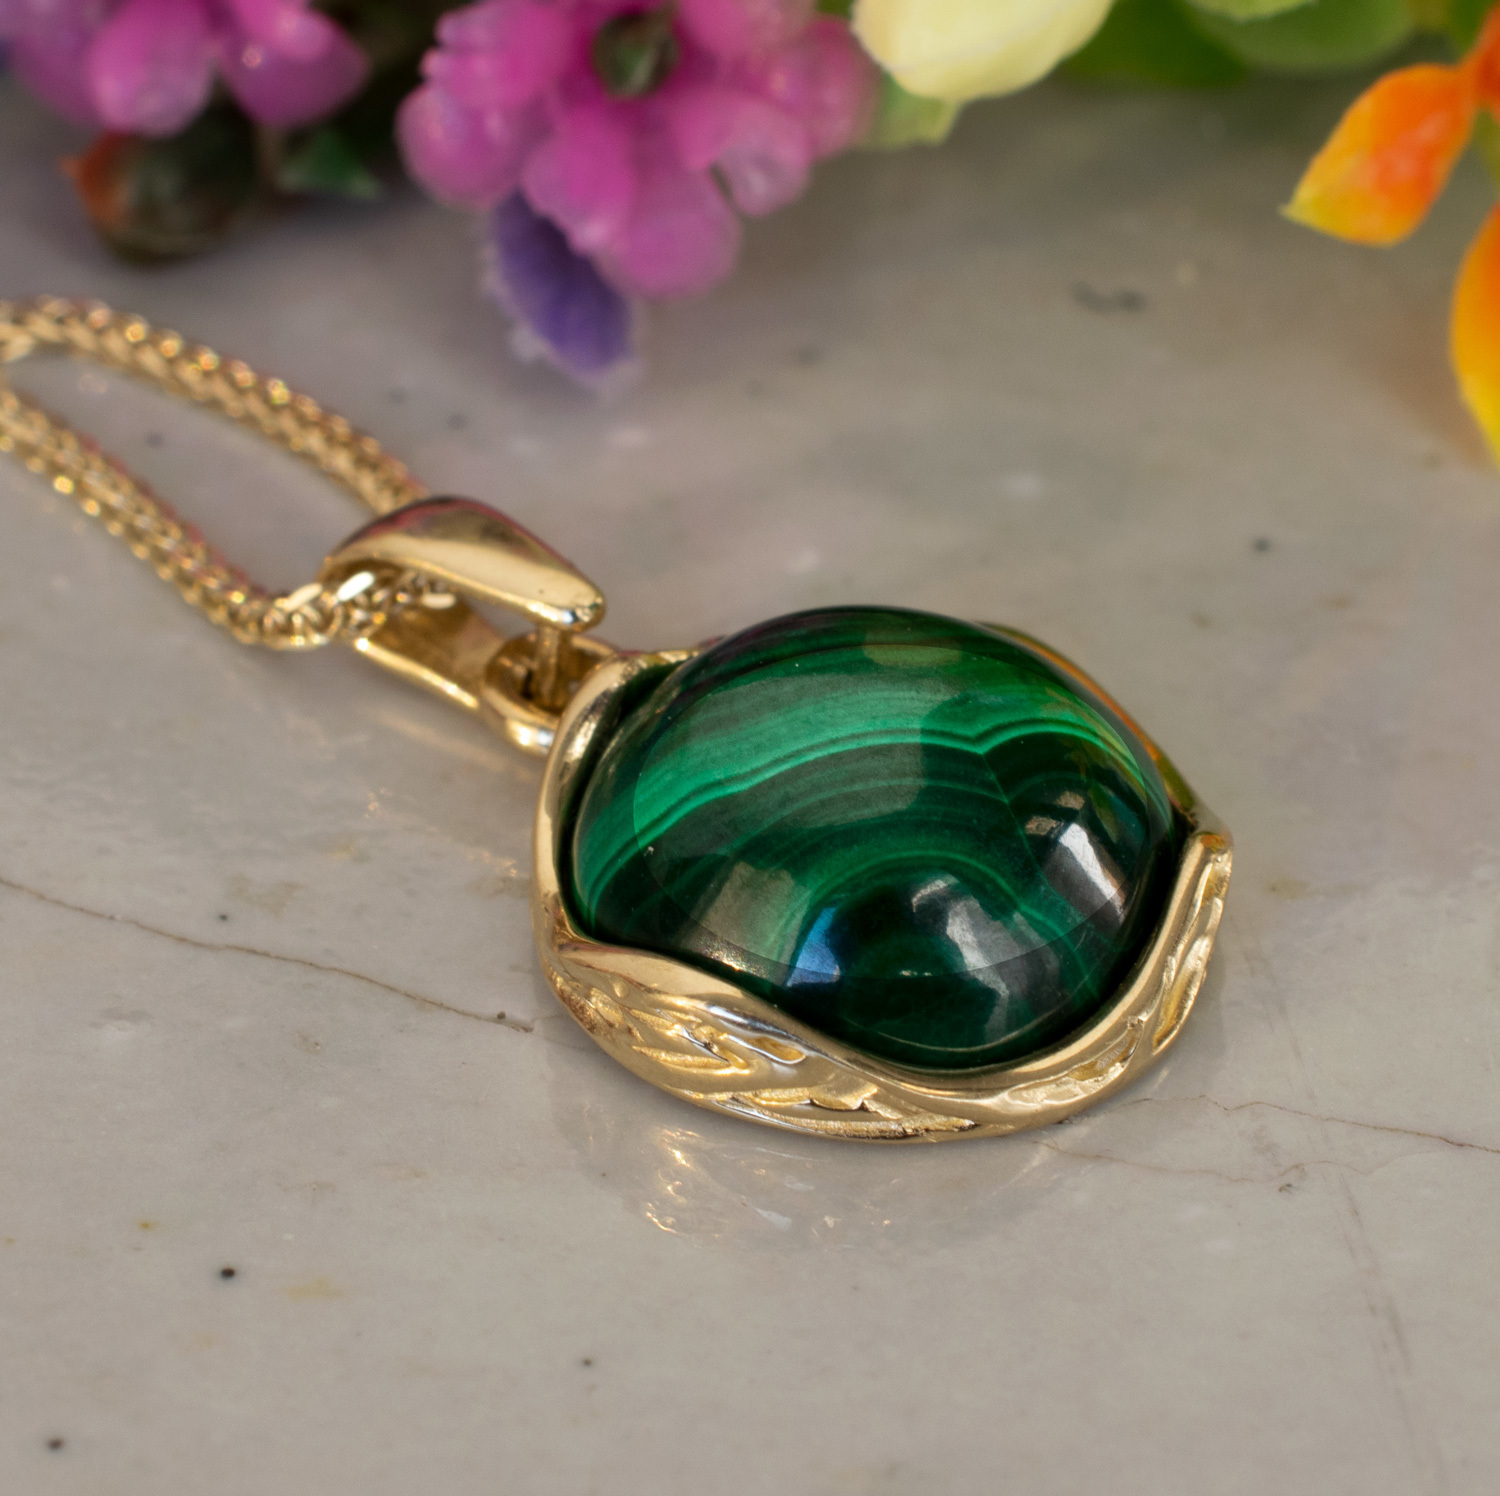 14K Solid Gold Malachite Pendant Vintage Style Necklace For Women